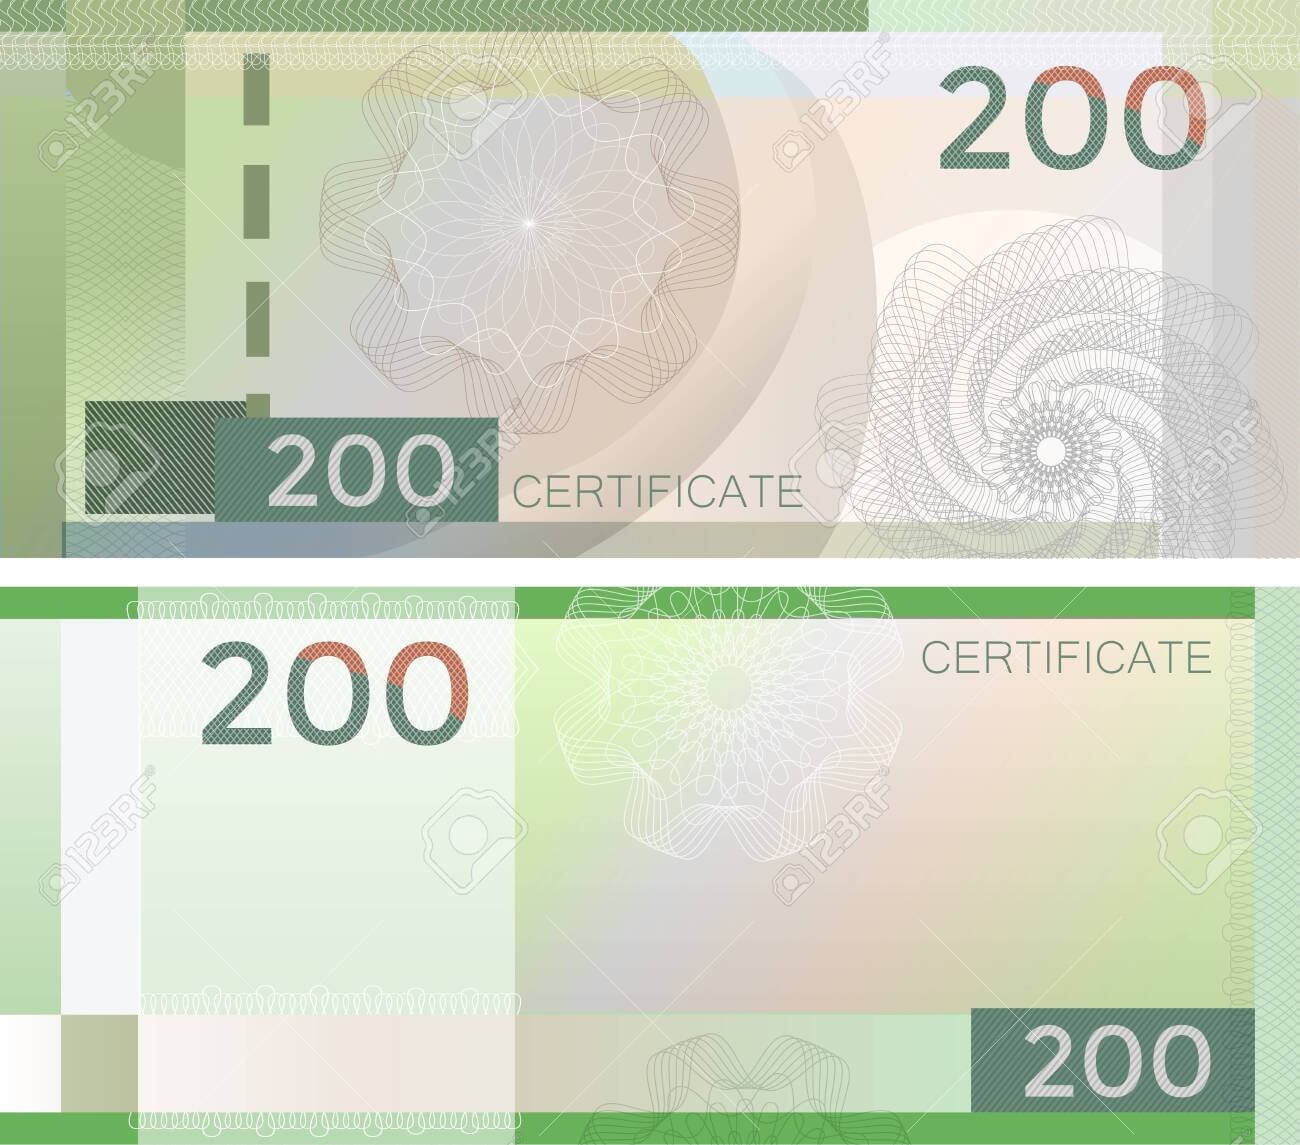 Voucher Template Banknote 200 With Guilloche Pattern Watermarks.. Intended For Bank Note Template